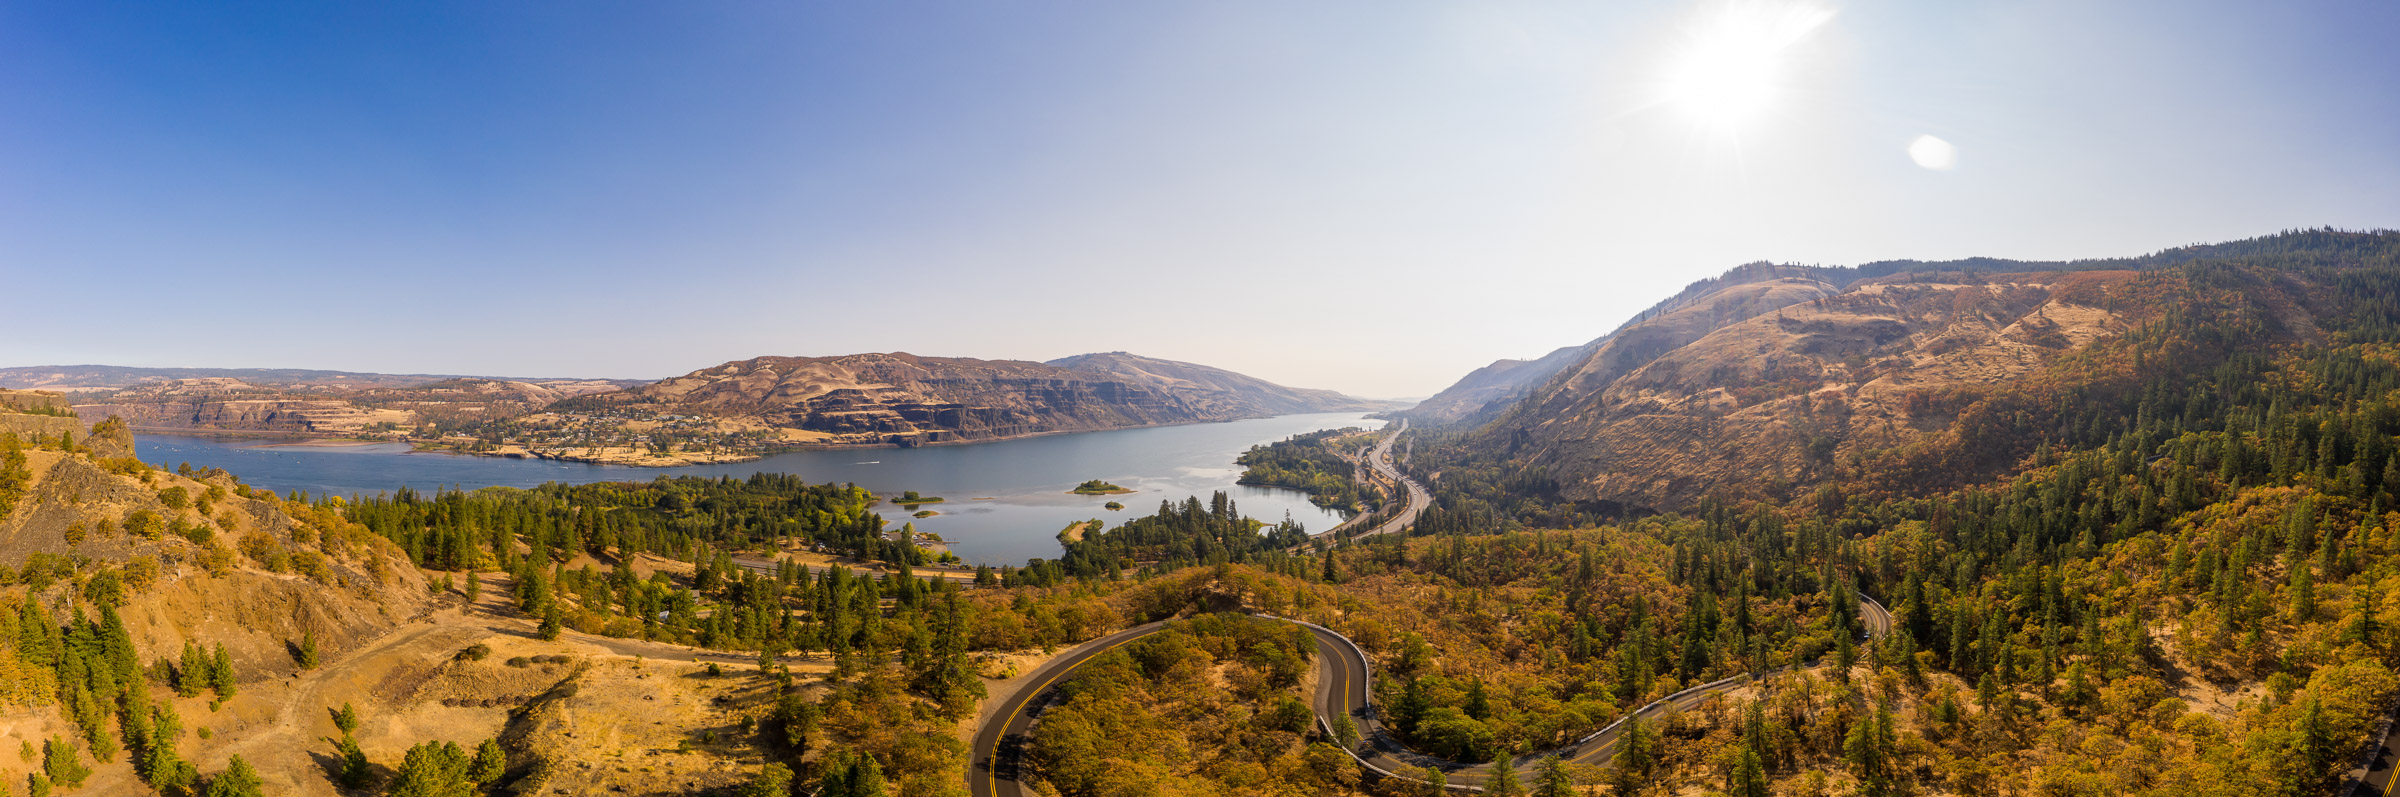 Columbia River, near the Rowena Crest Viewpoint.